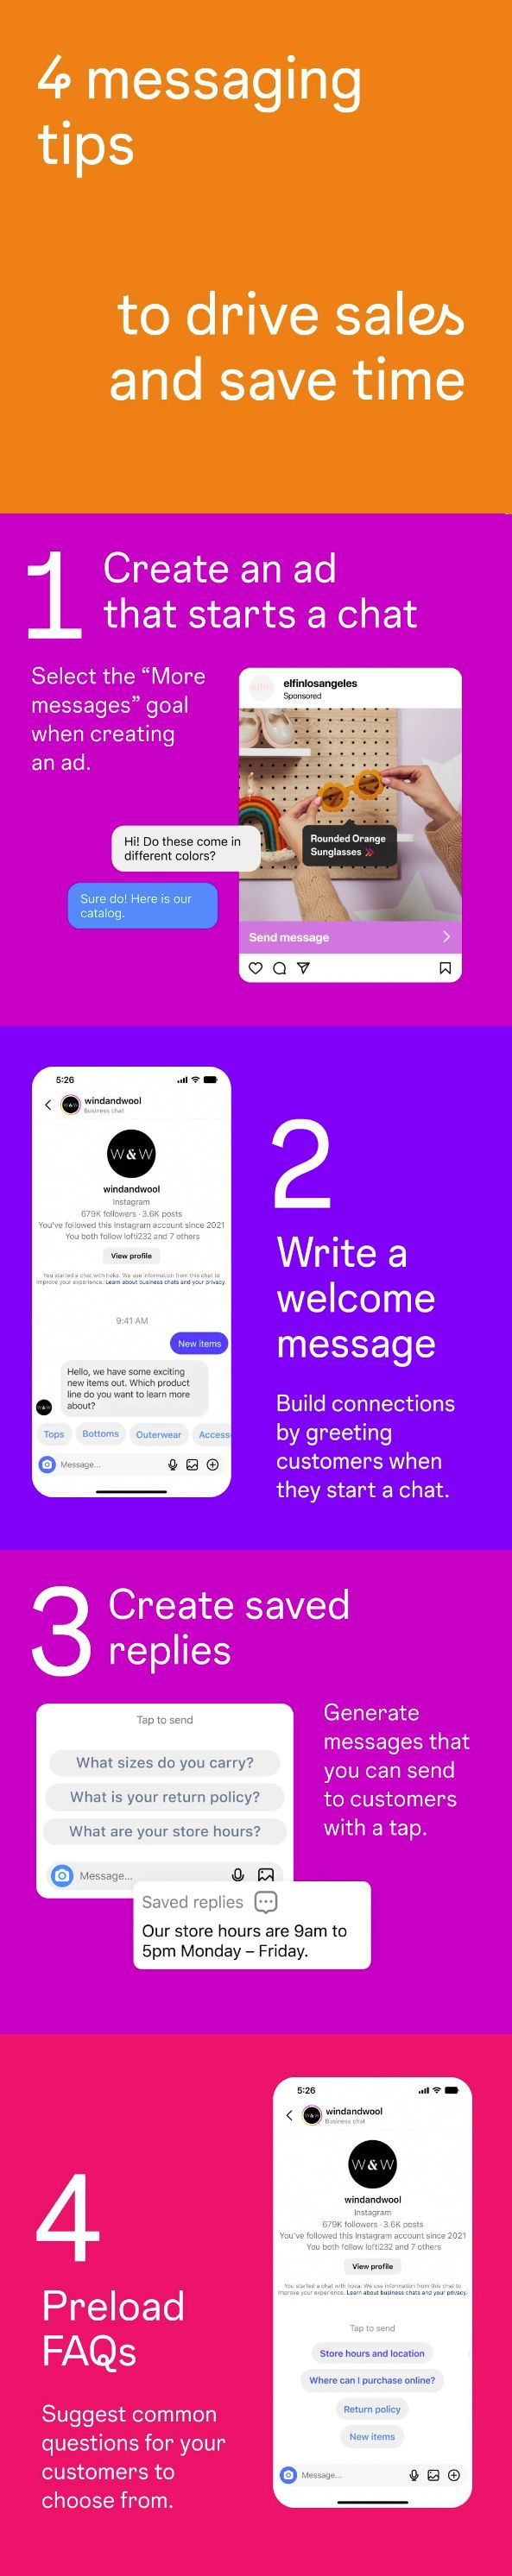 4 messaging tips infographic